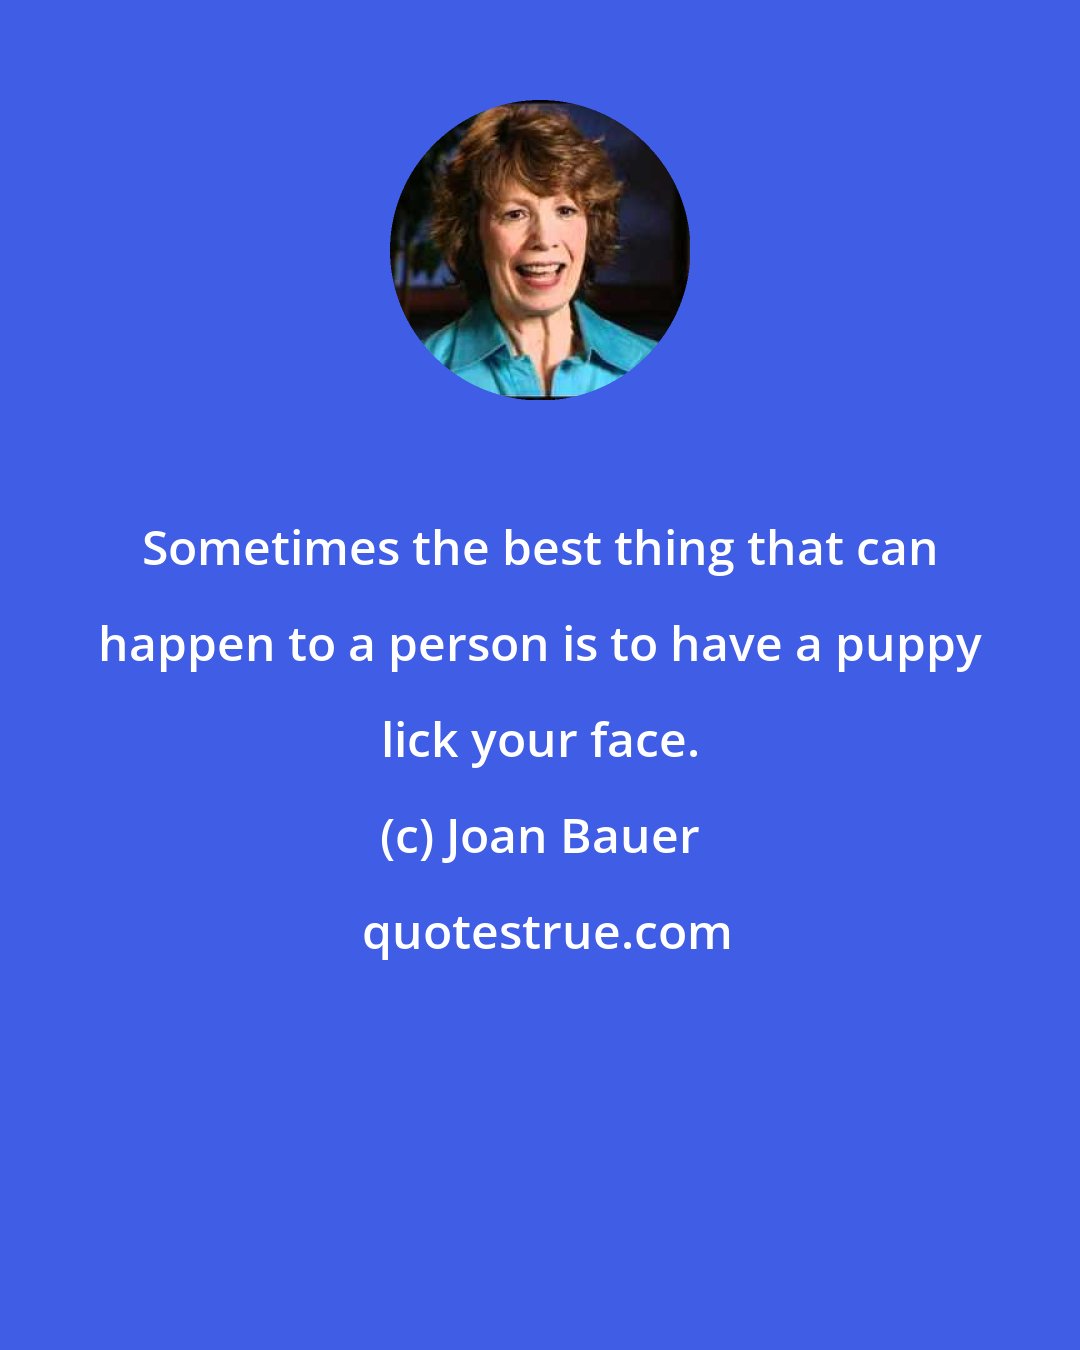 Joan Bauer: Sometimes the best thing that can happen to a person is to have a puppy lick your face.